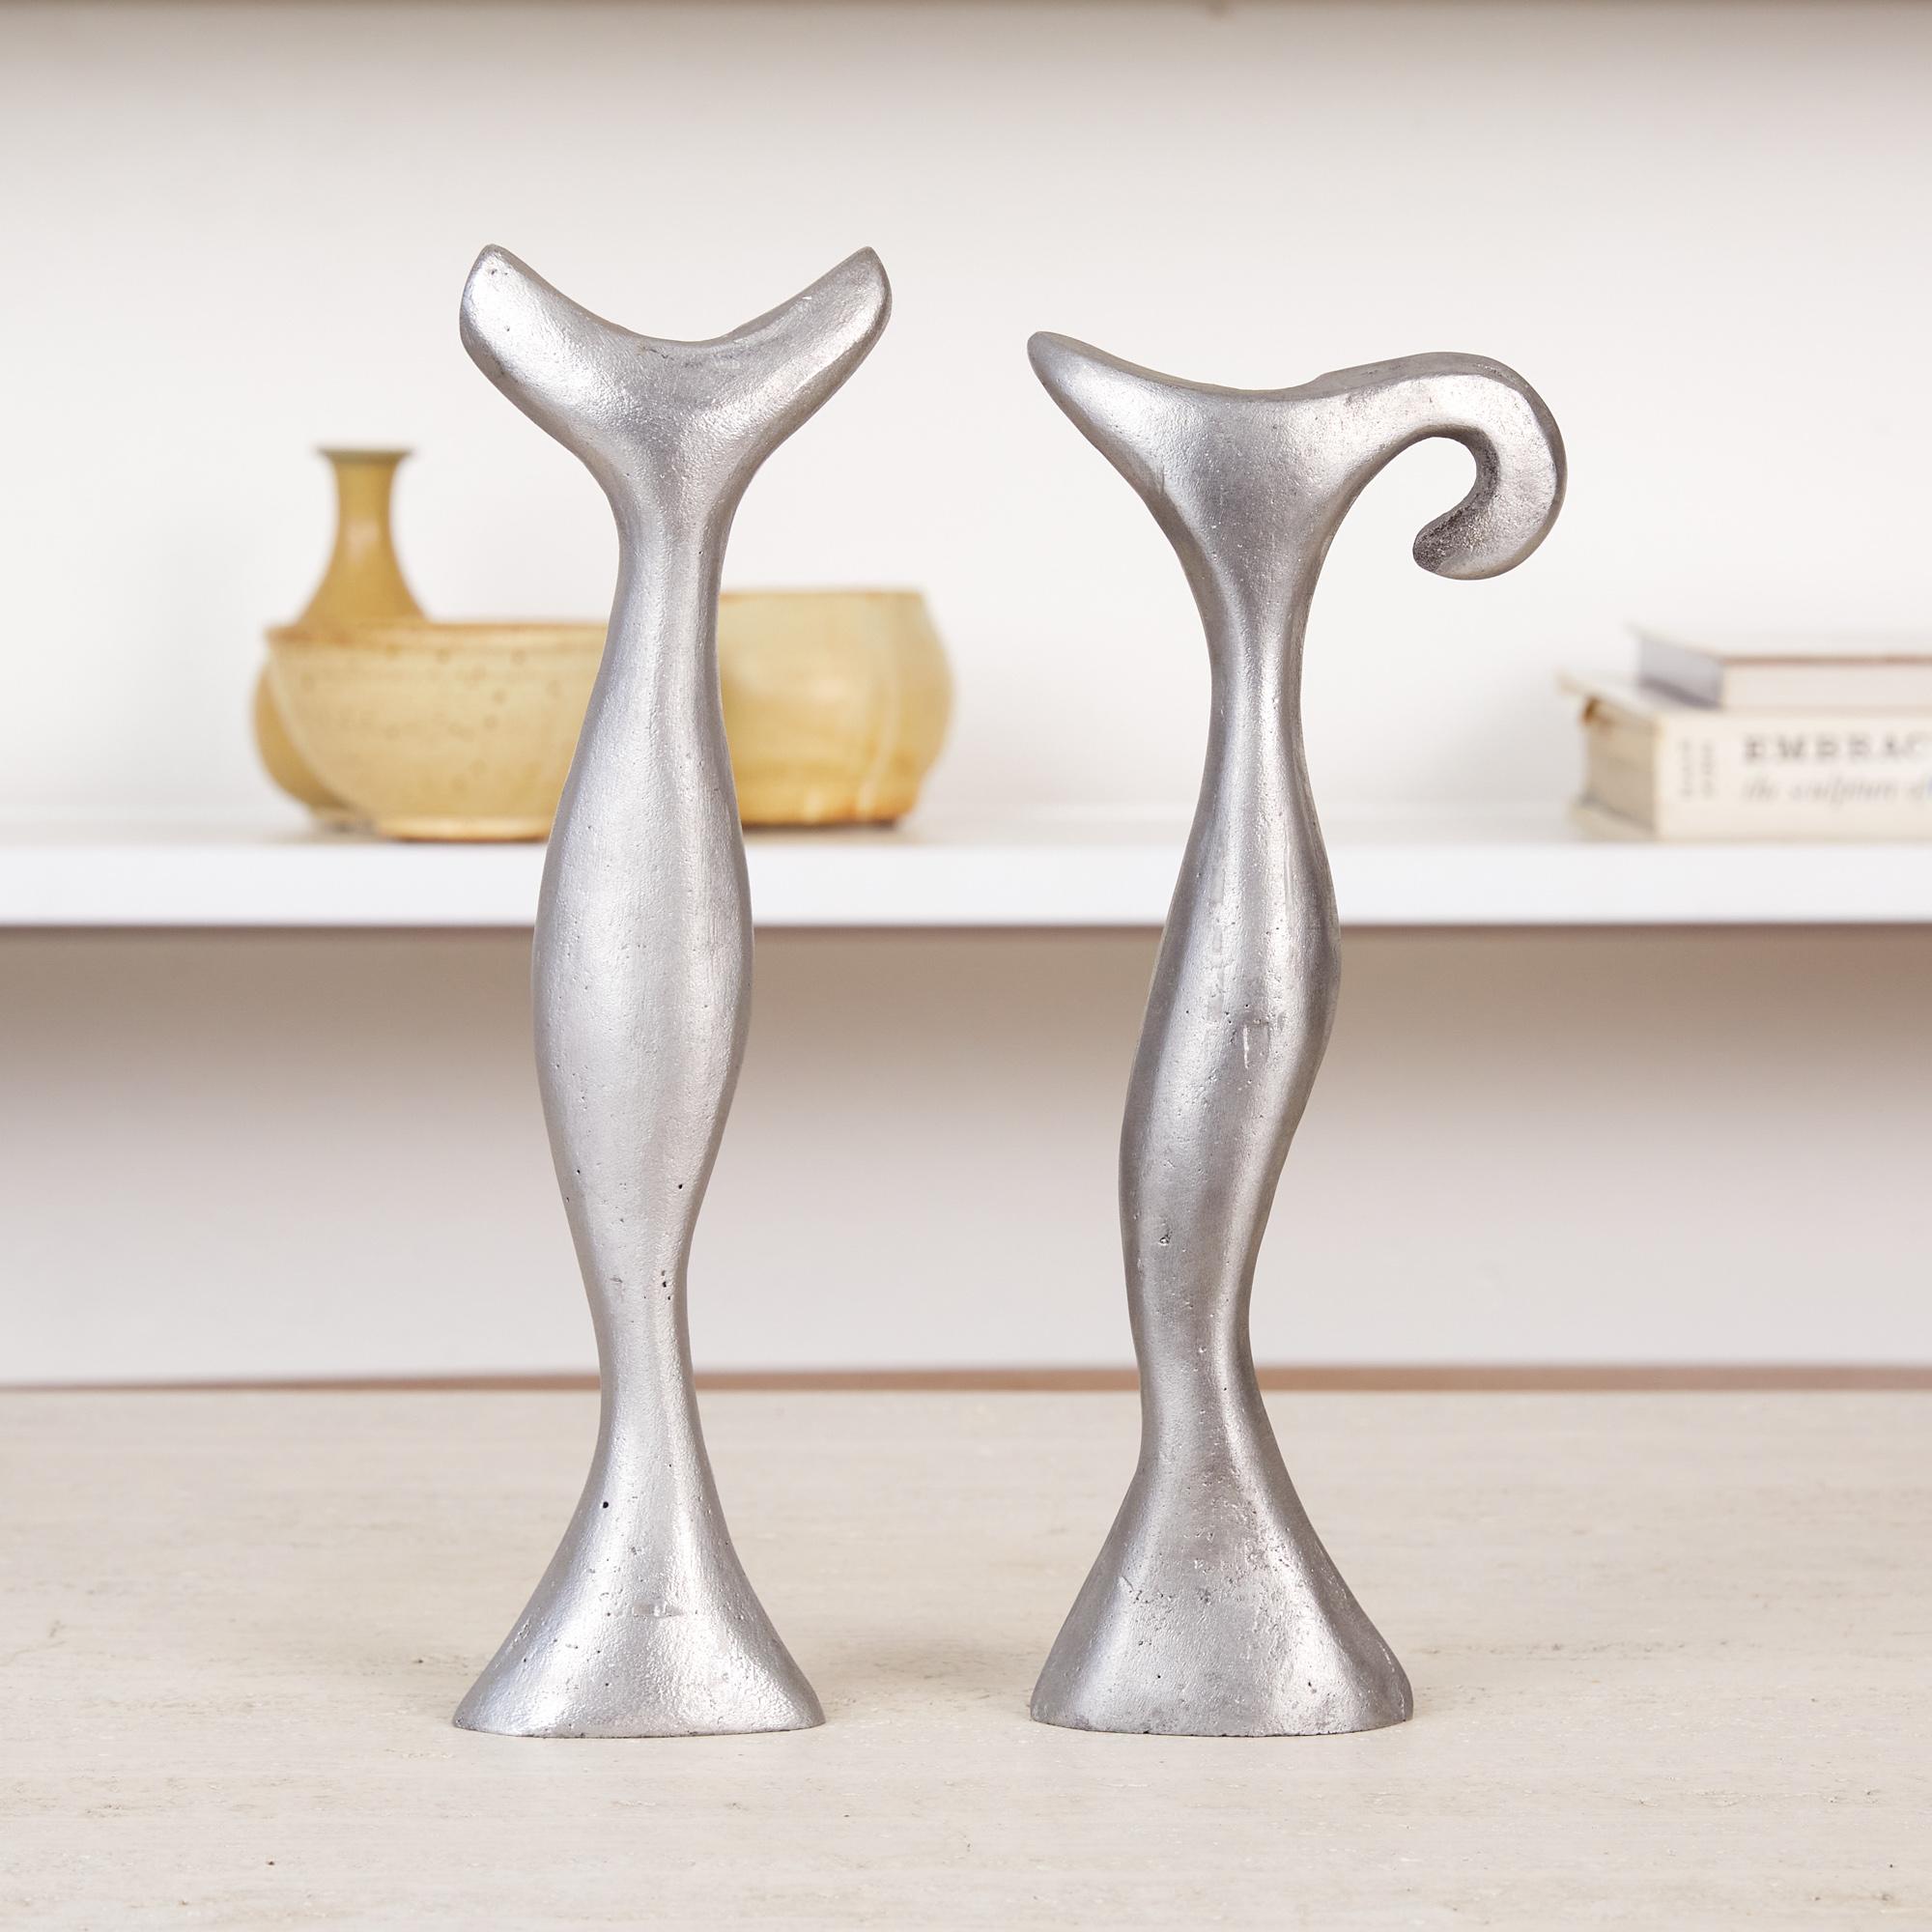 The pair of cast aluminum candlesticks feature an abstract form that goes up into a curvaceous opening that houses the candles. Small bubbles and slight imperfections left over from the casting process peep through the satin polish surface that